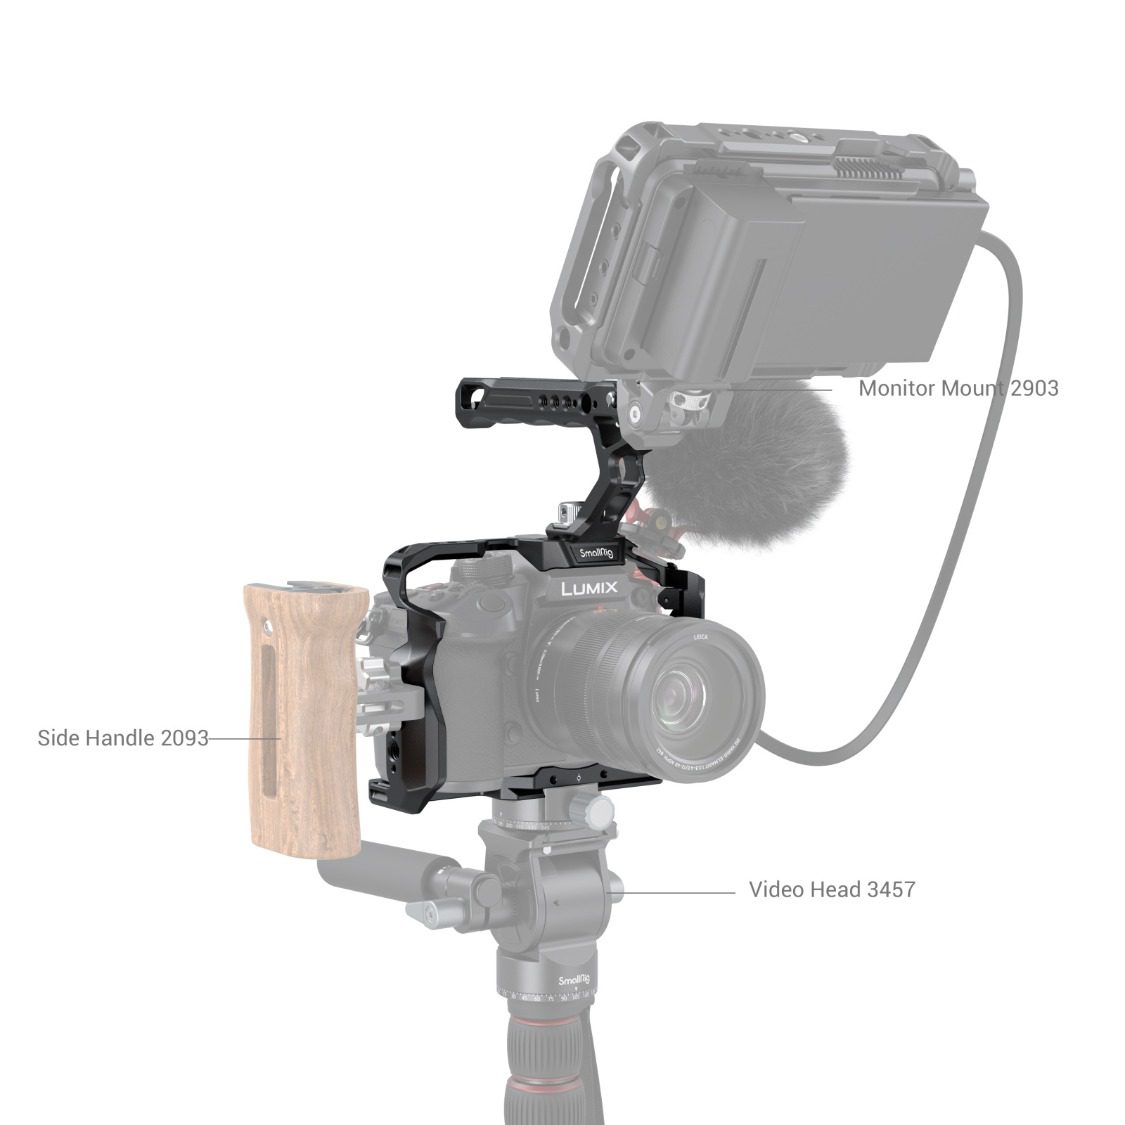 SmallRig Cage Kit for Lumix GH6 3785